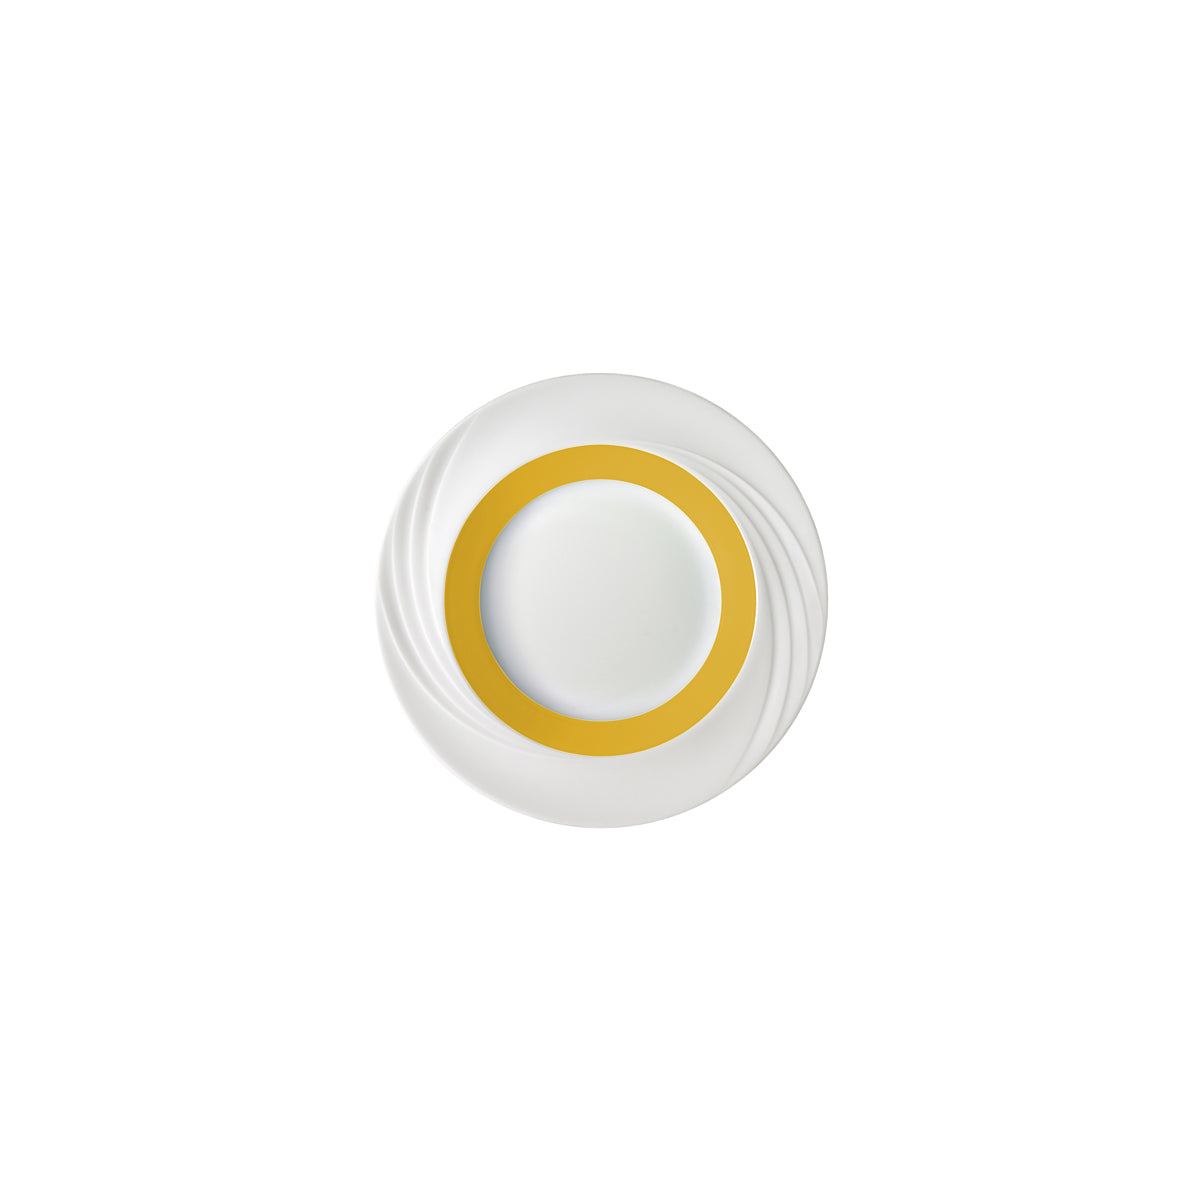 SH9181823/62981 Donna Senior Decor Round Deep Plate with Yellow Wide Band 230mm Tomkin Australia Hospitality Supplies